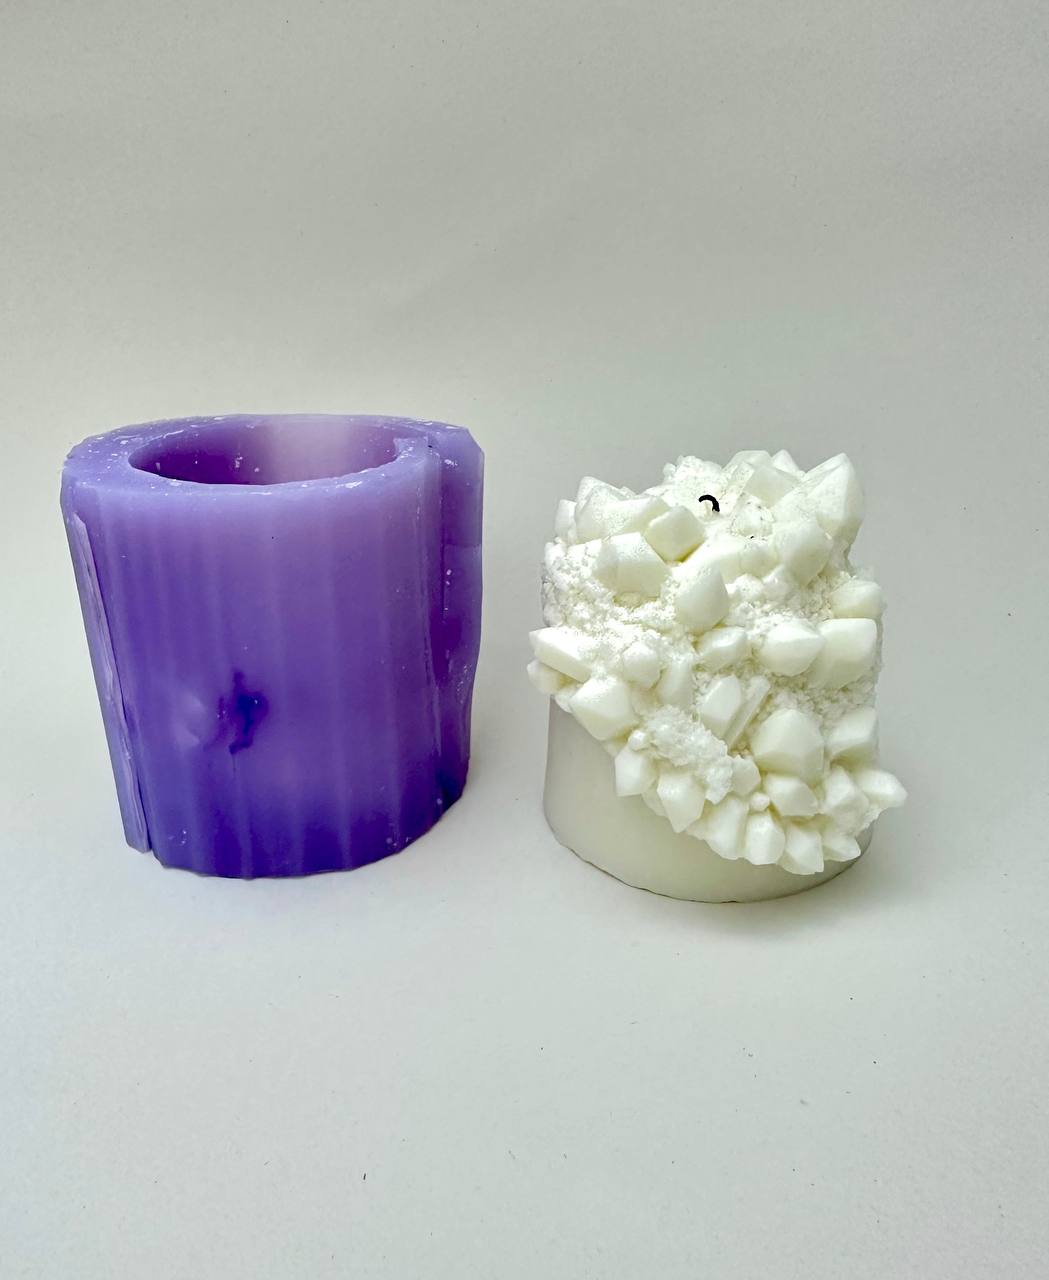 Exclusive Crystal Large Silicone Mold Artisanal Candle Making